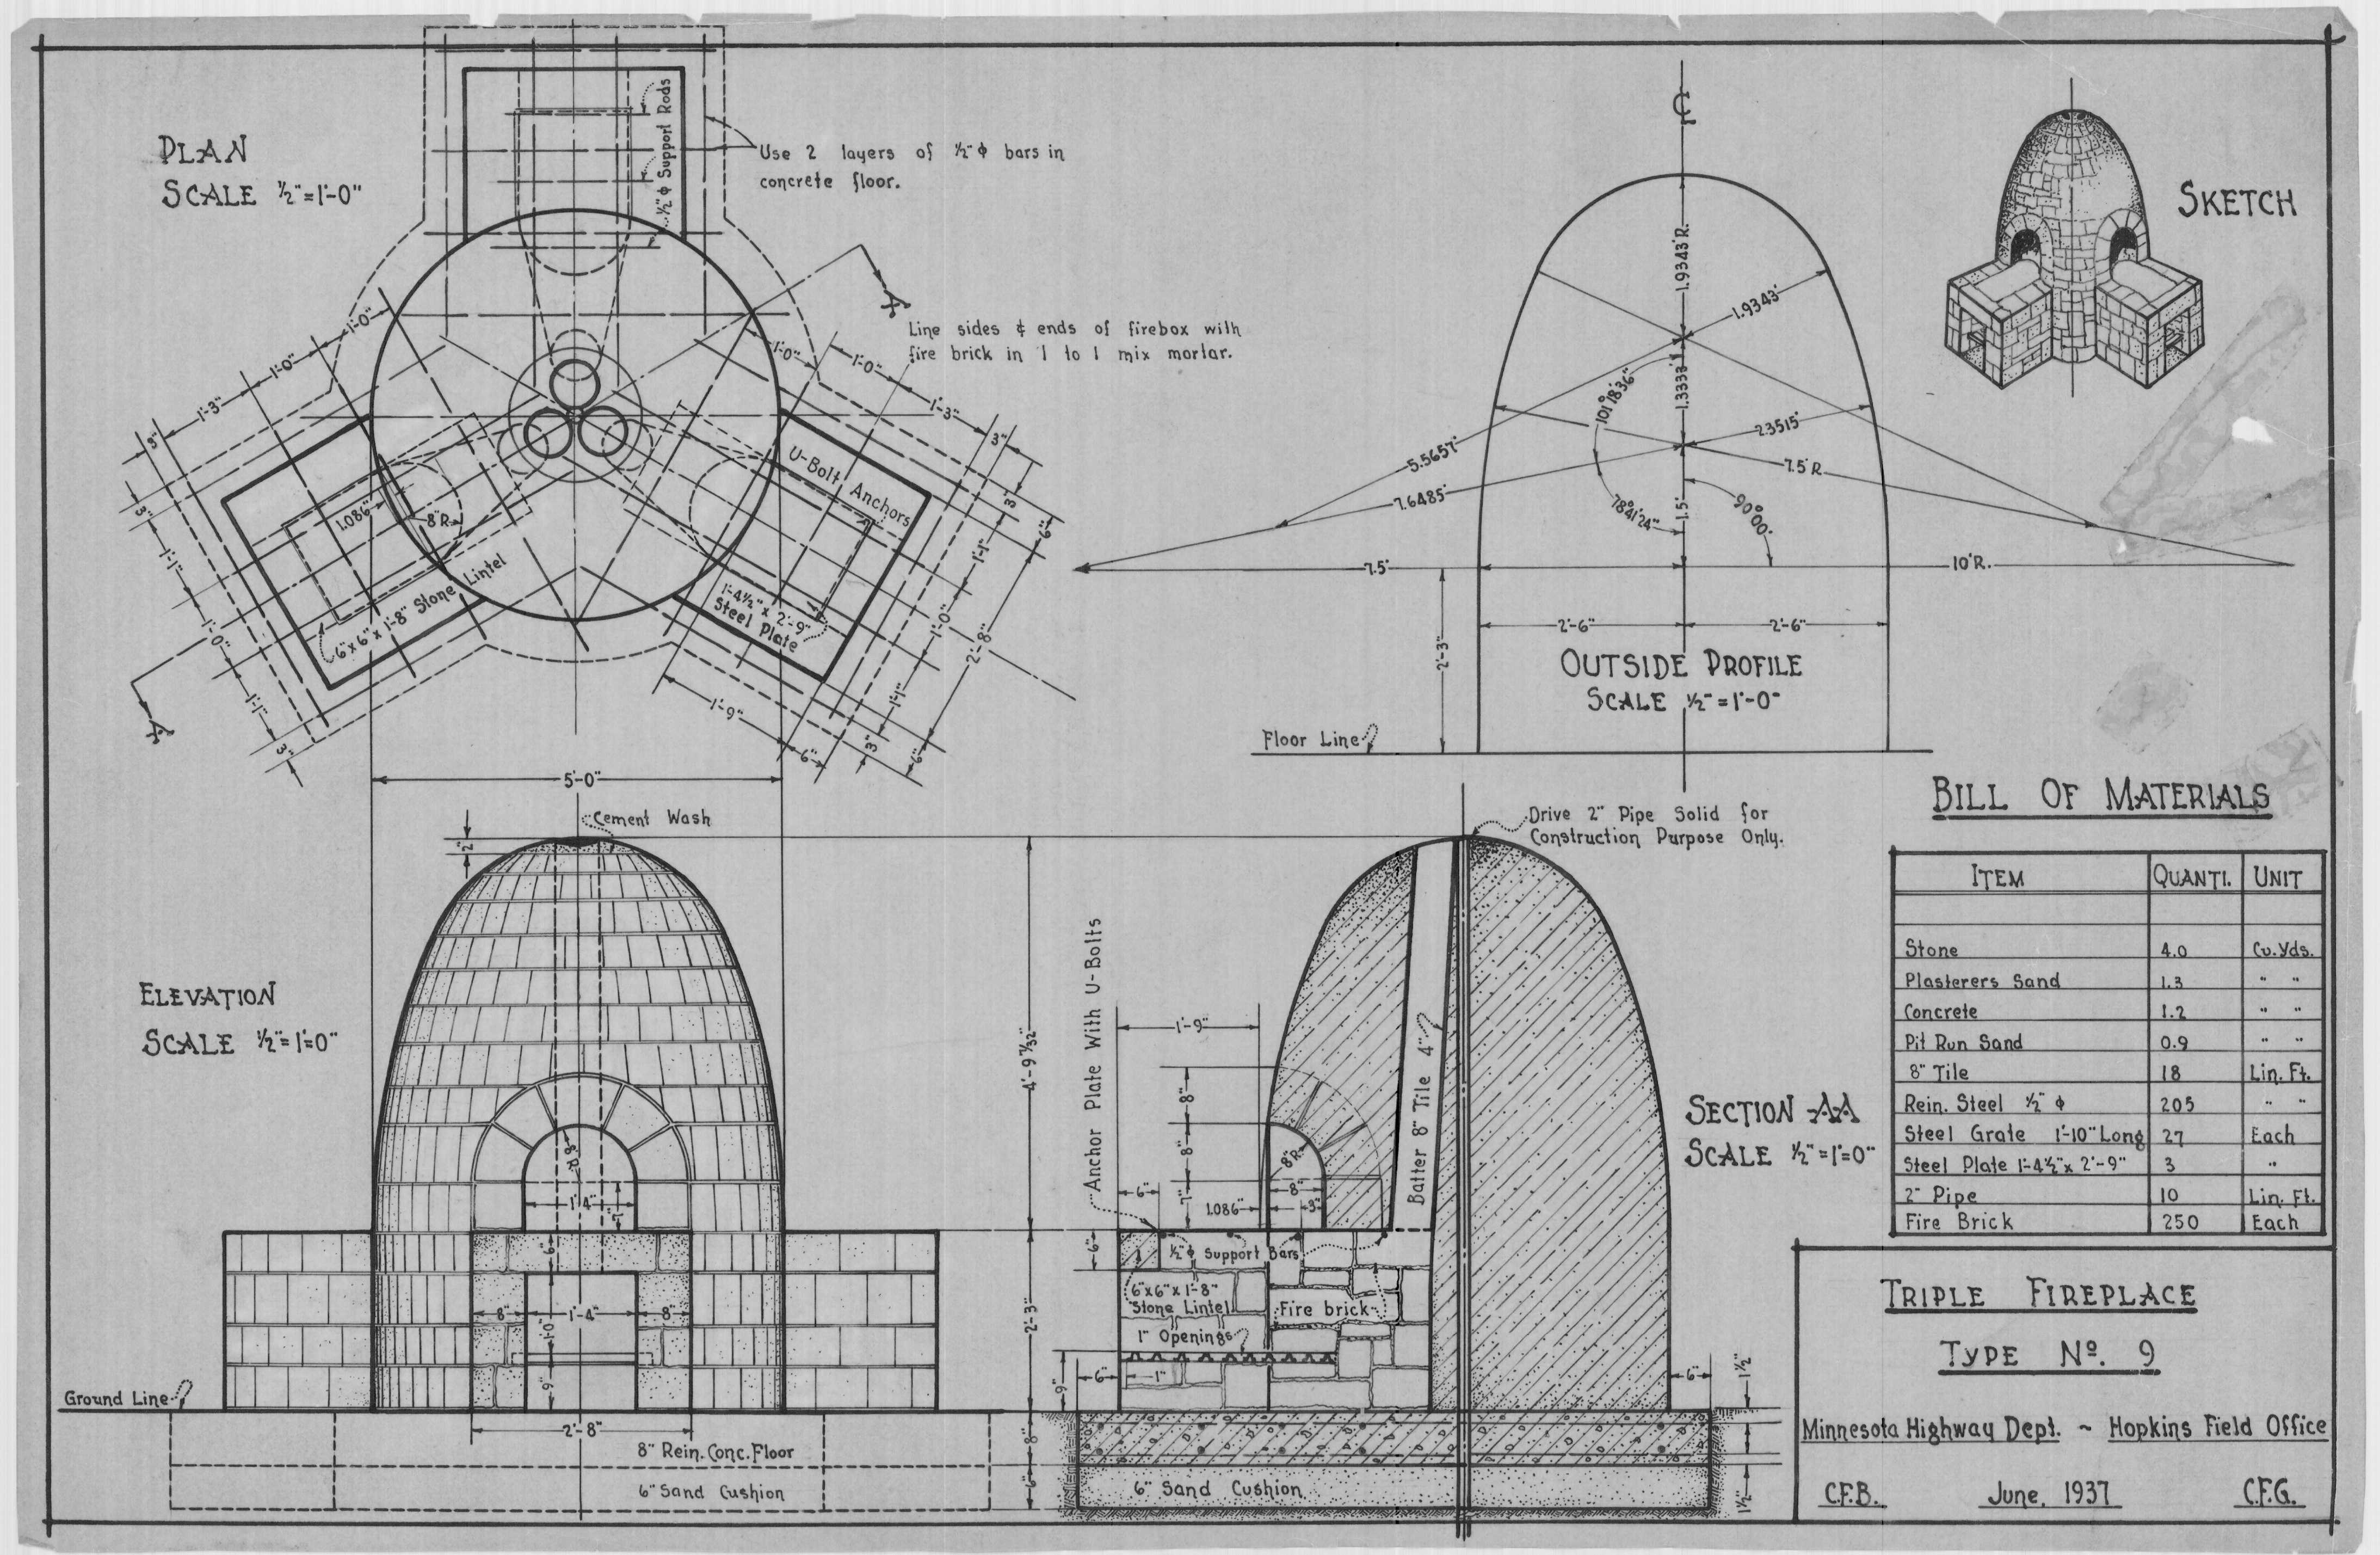 This original plan of a beehive fireplace was drawn in painstaking detail in 1937.